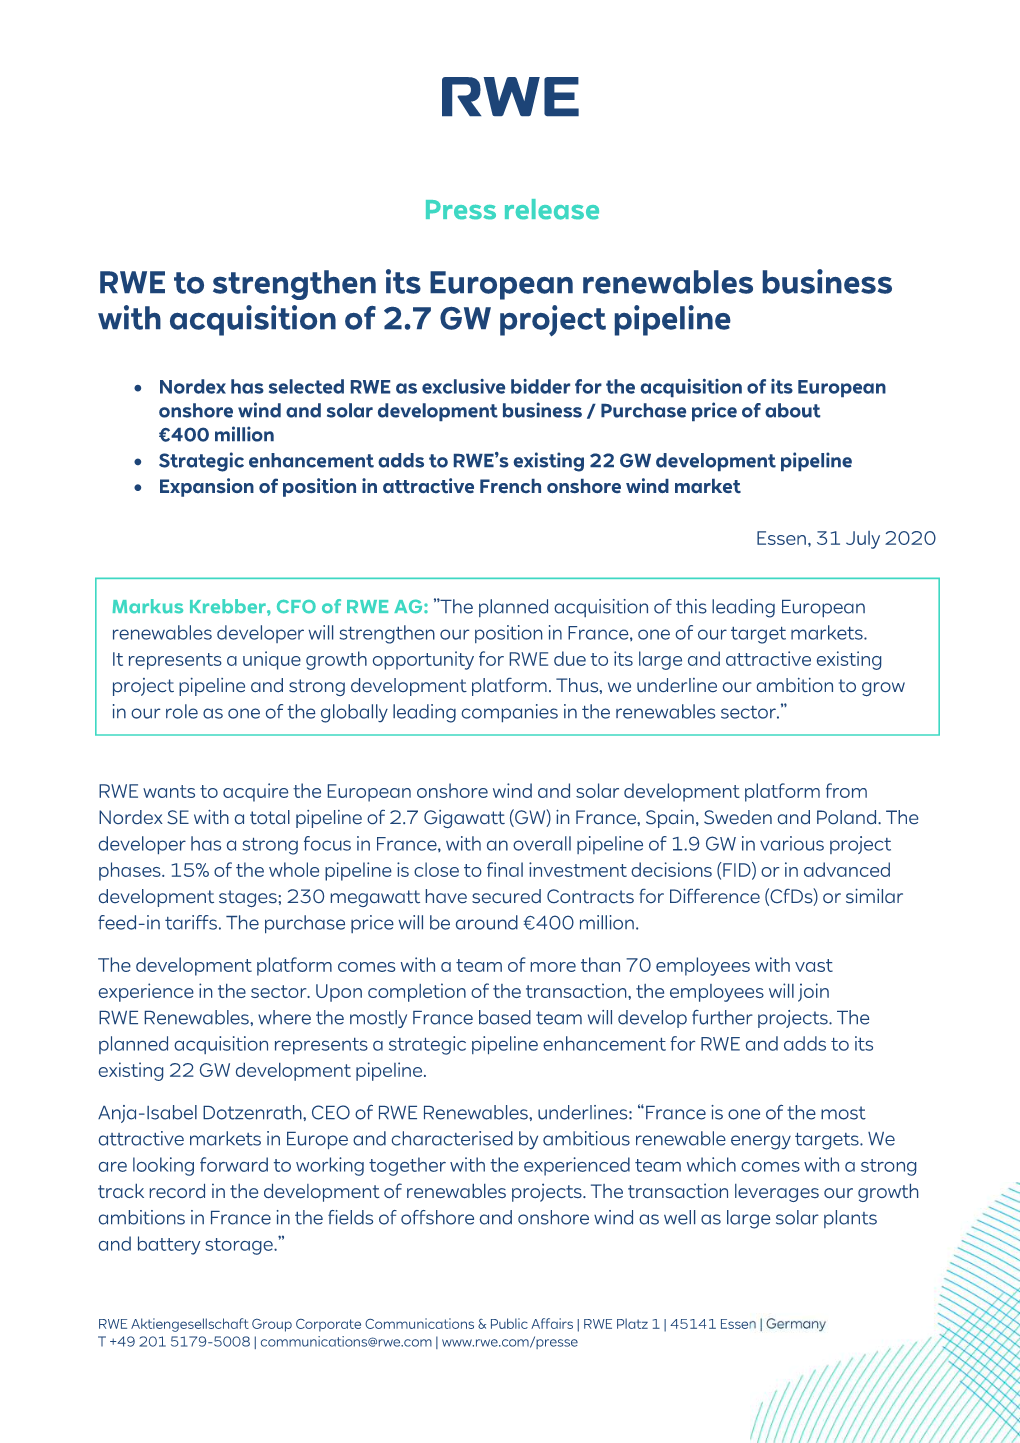 RWE to Strengthen Its European Renewables Business with Acquisition of 2.7 GW Project Pipeline